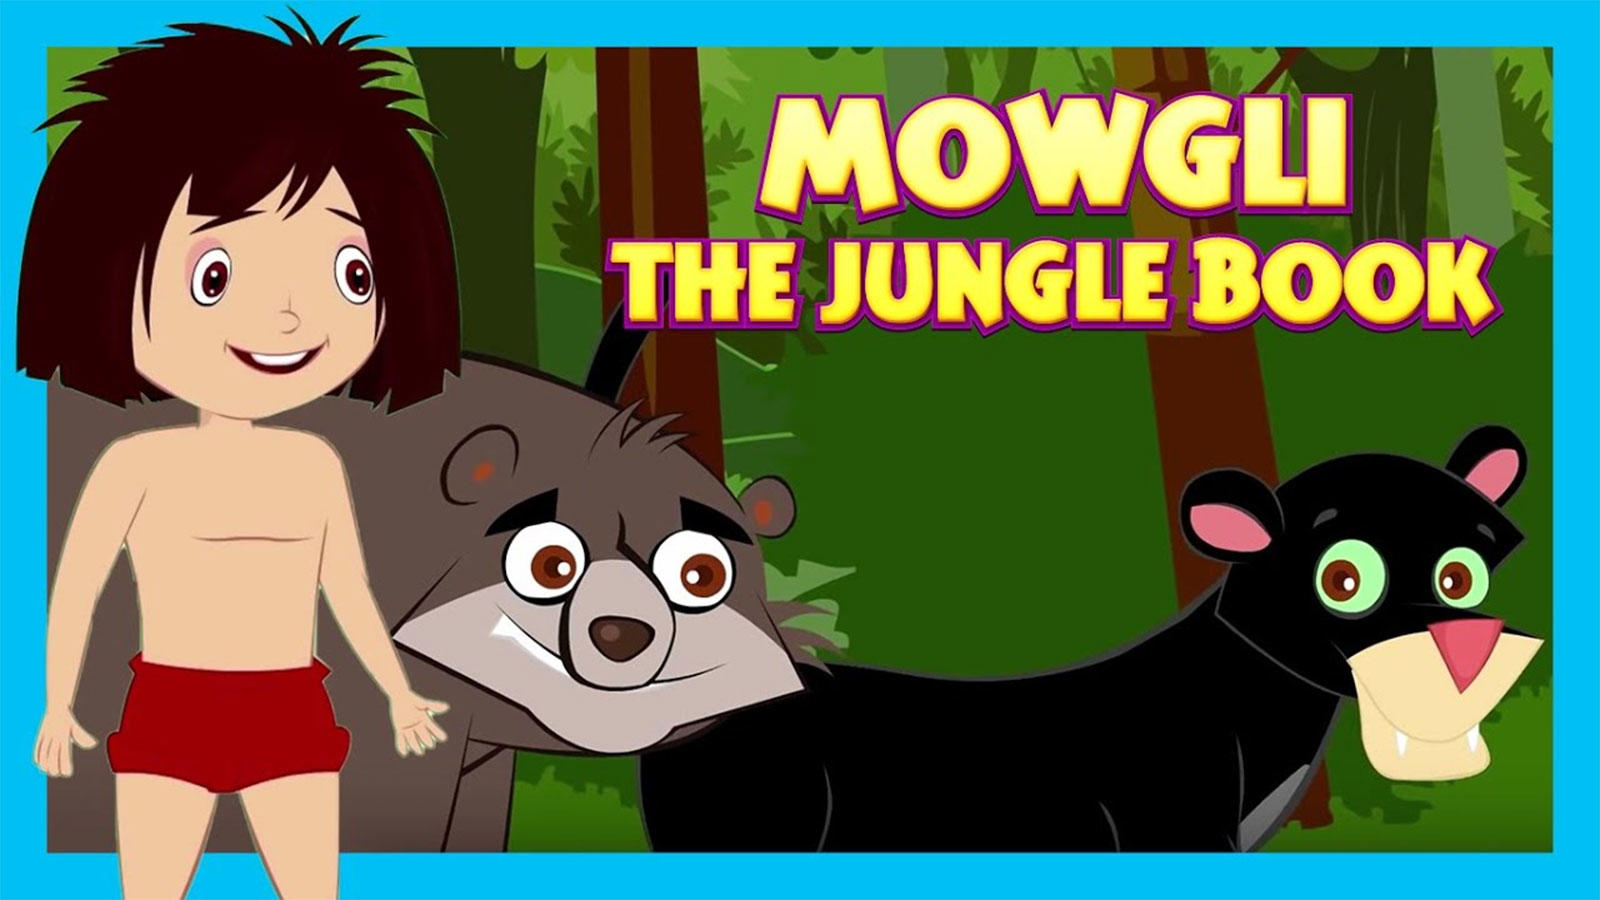 Most Popular 'Kids' Shows In English - Mowgli The Jungle Book! | Videos For  Kids | Kids Cartoons | Cartoon Animation For Children | Entertainment -  Times of India Videos